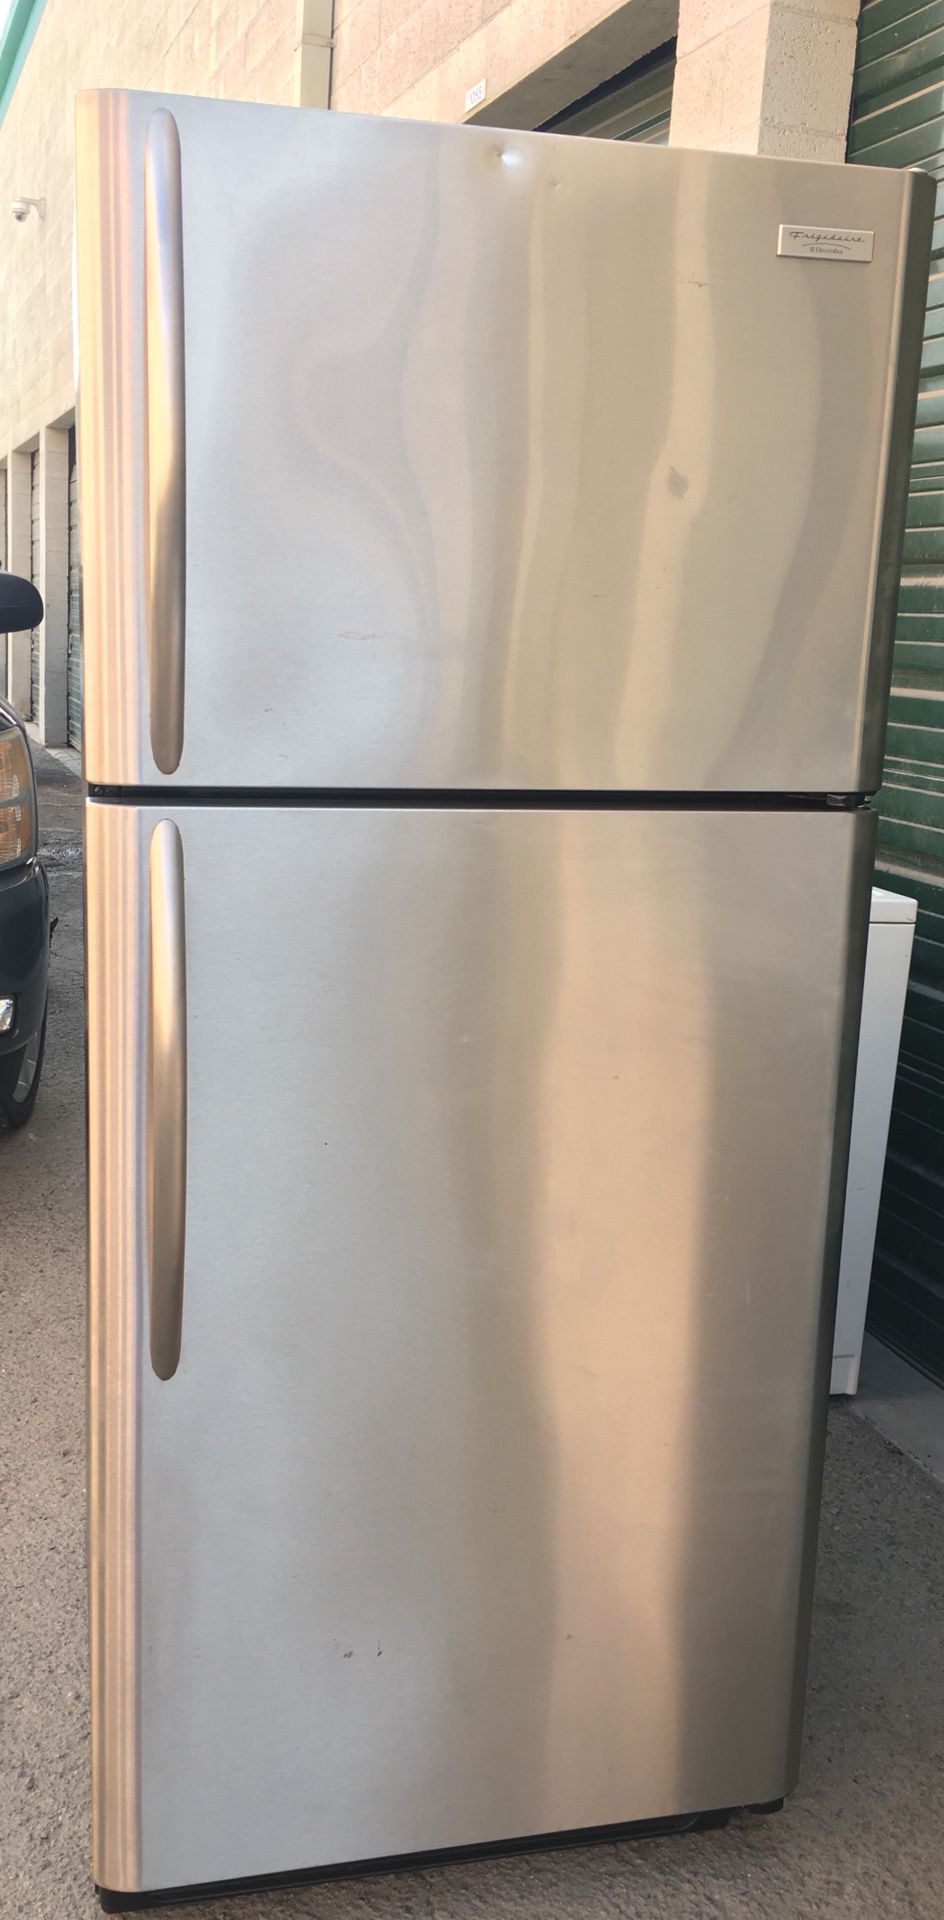 FRIGIDAIRE 30” REFRIGERATOR APT SIZE WITH ICE MAKER. CLEAN